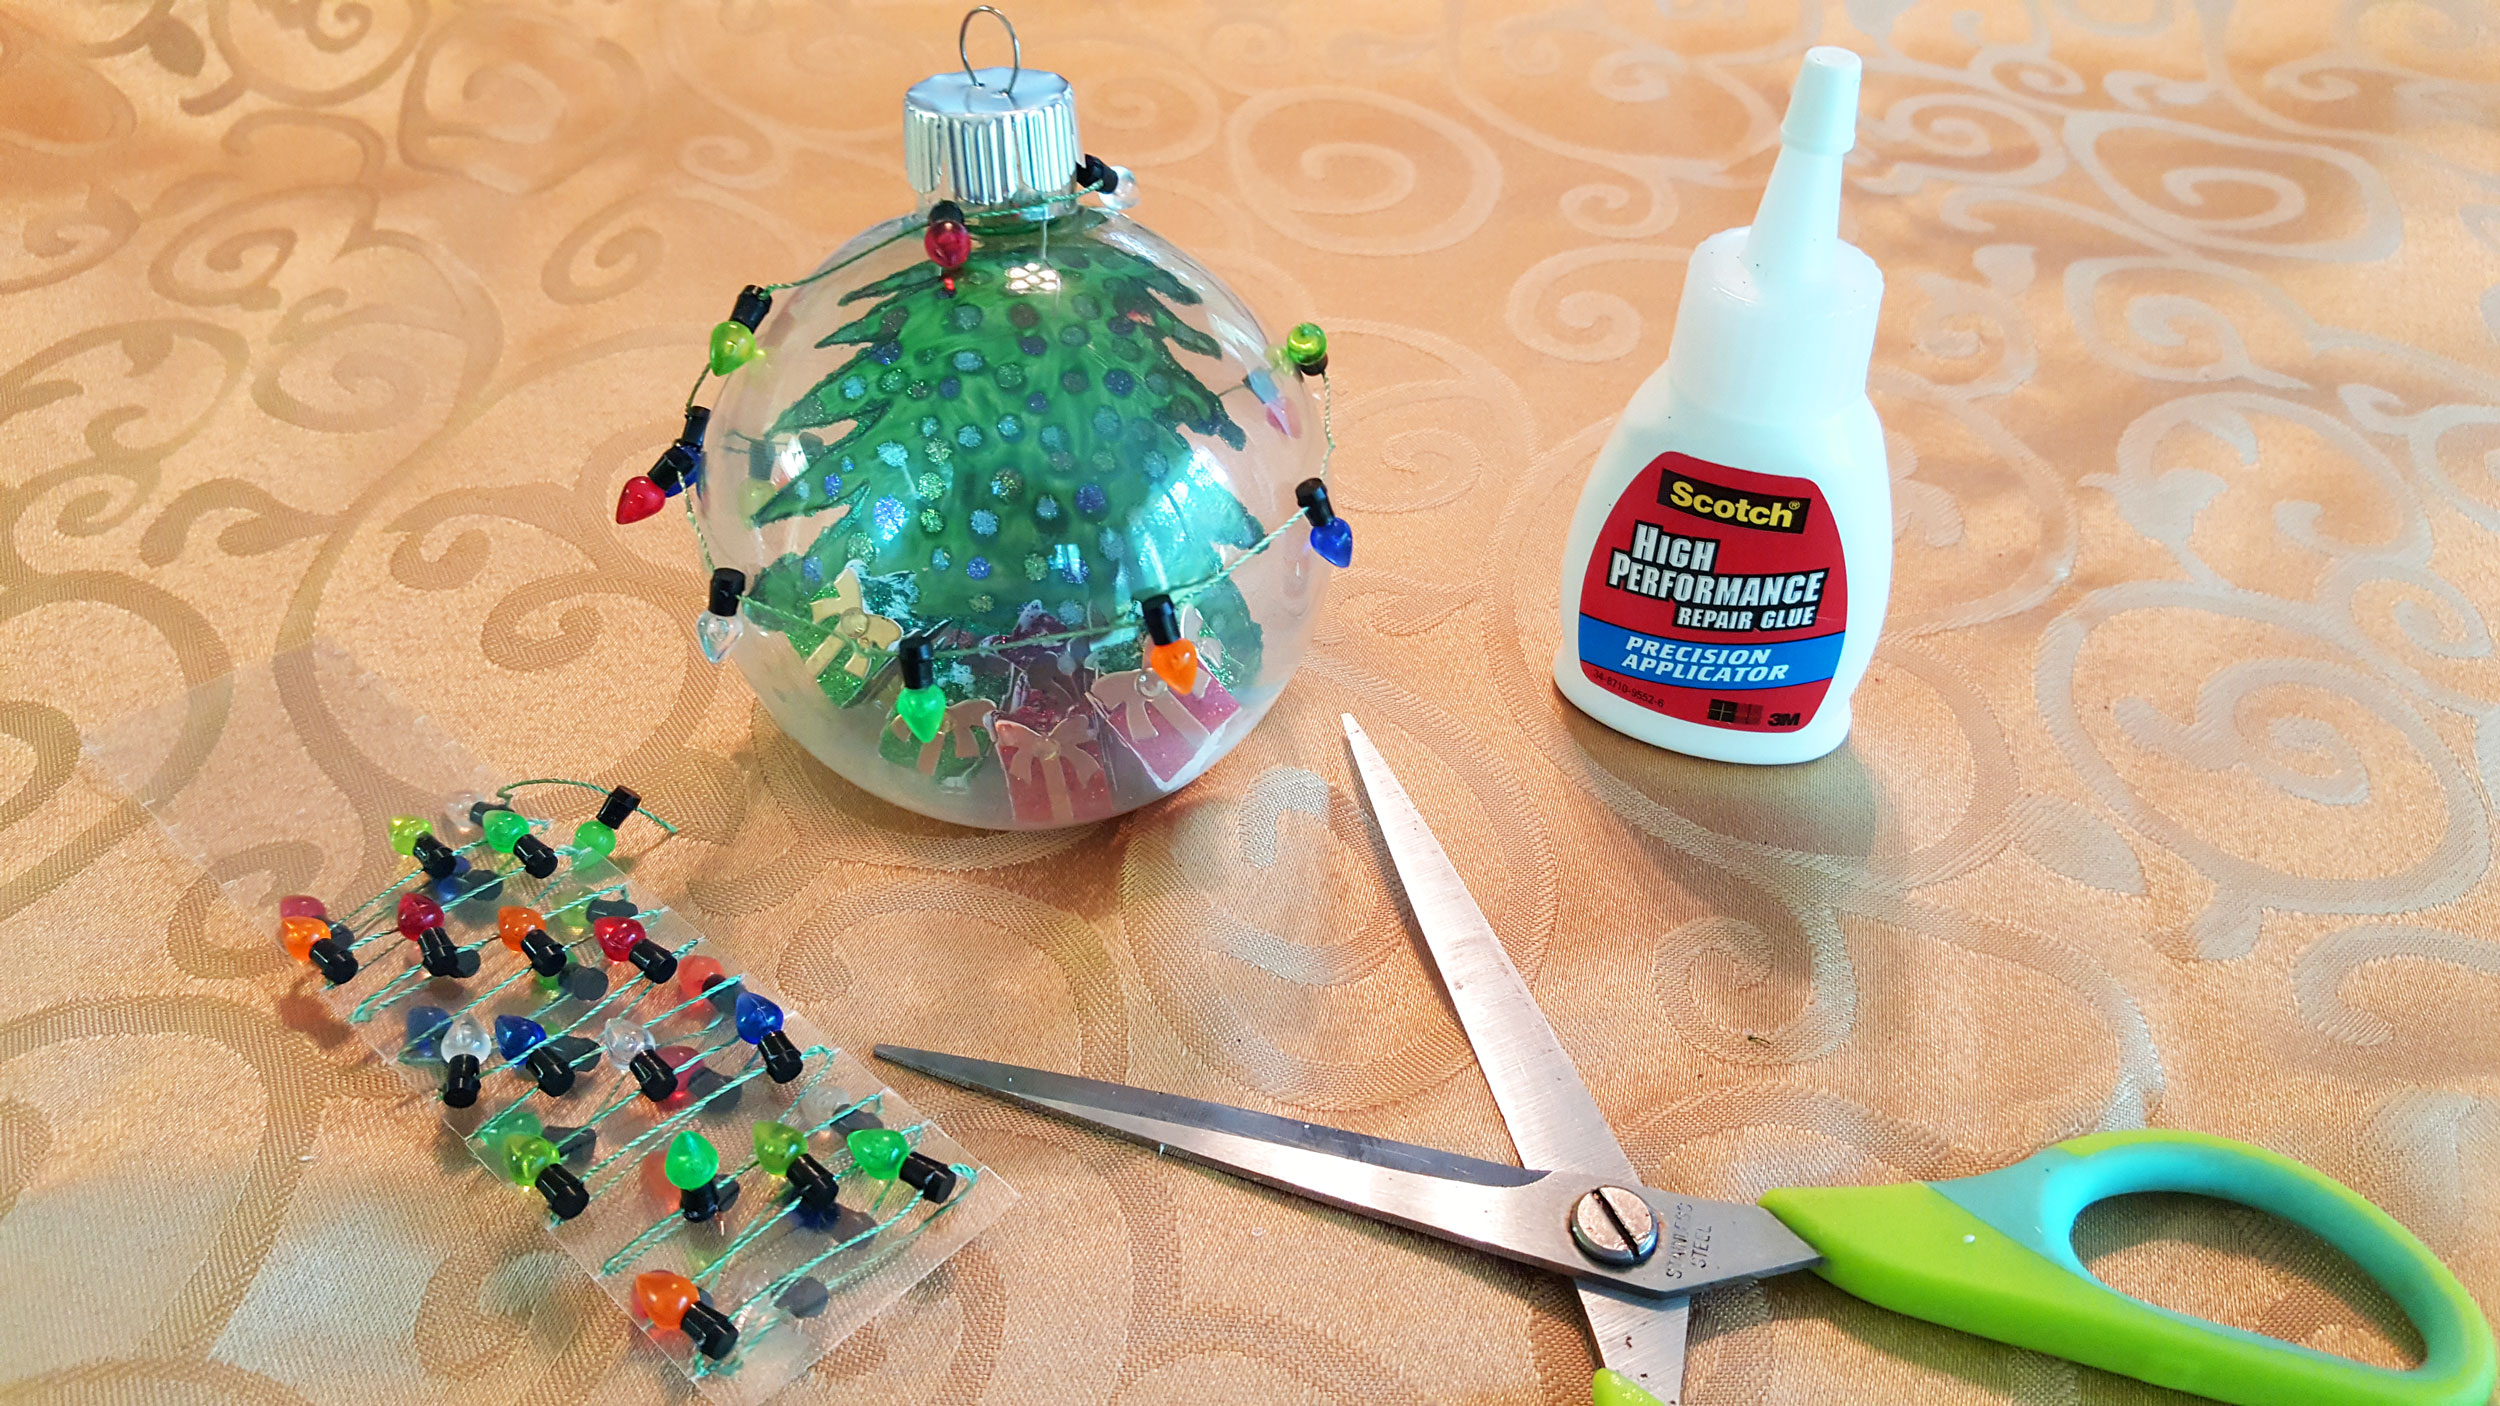 Step 6 is to glue the decorative Christmas lights to the circumference of the ball and use little dabs of glue on every couple lights. | OrnamentShop.com